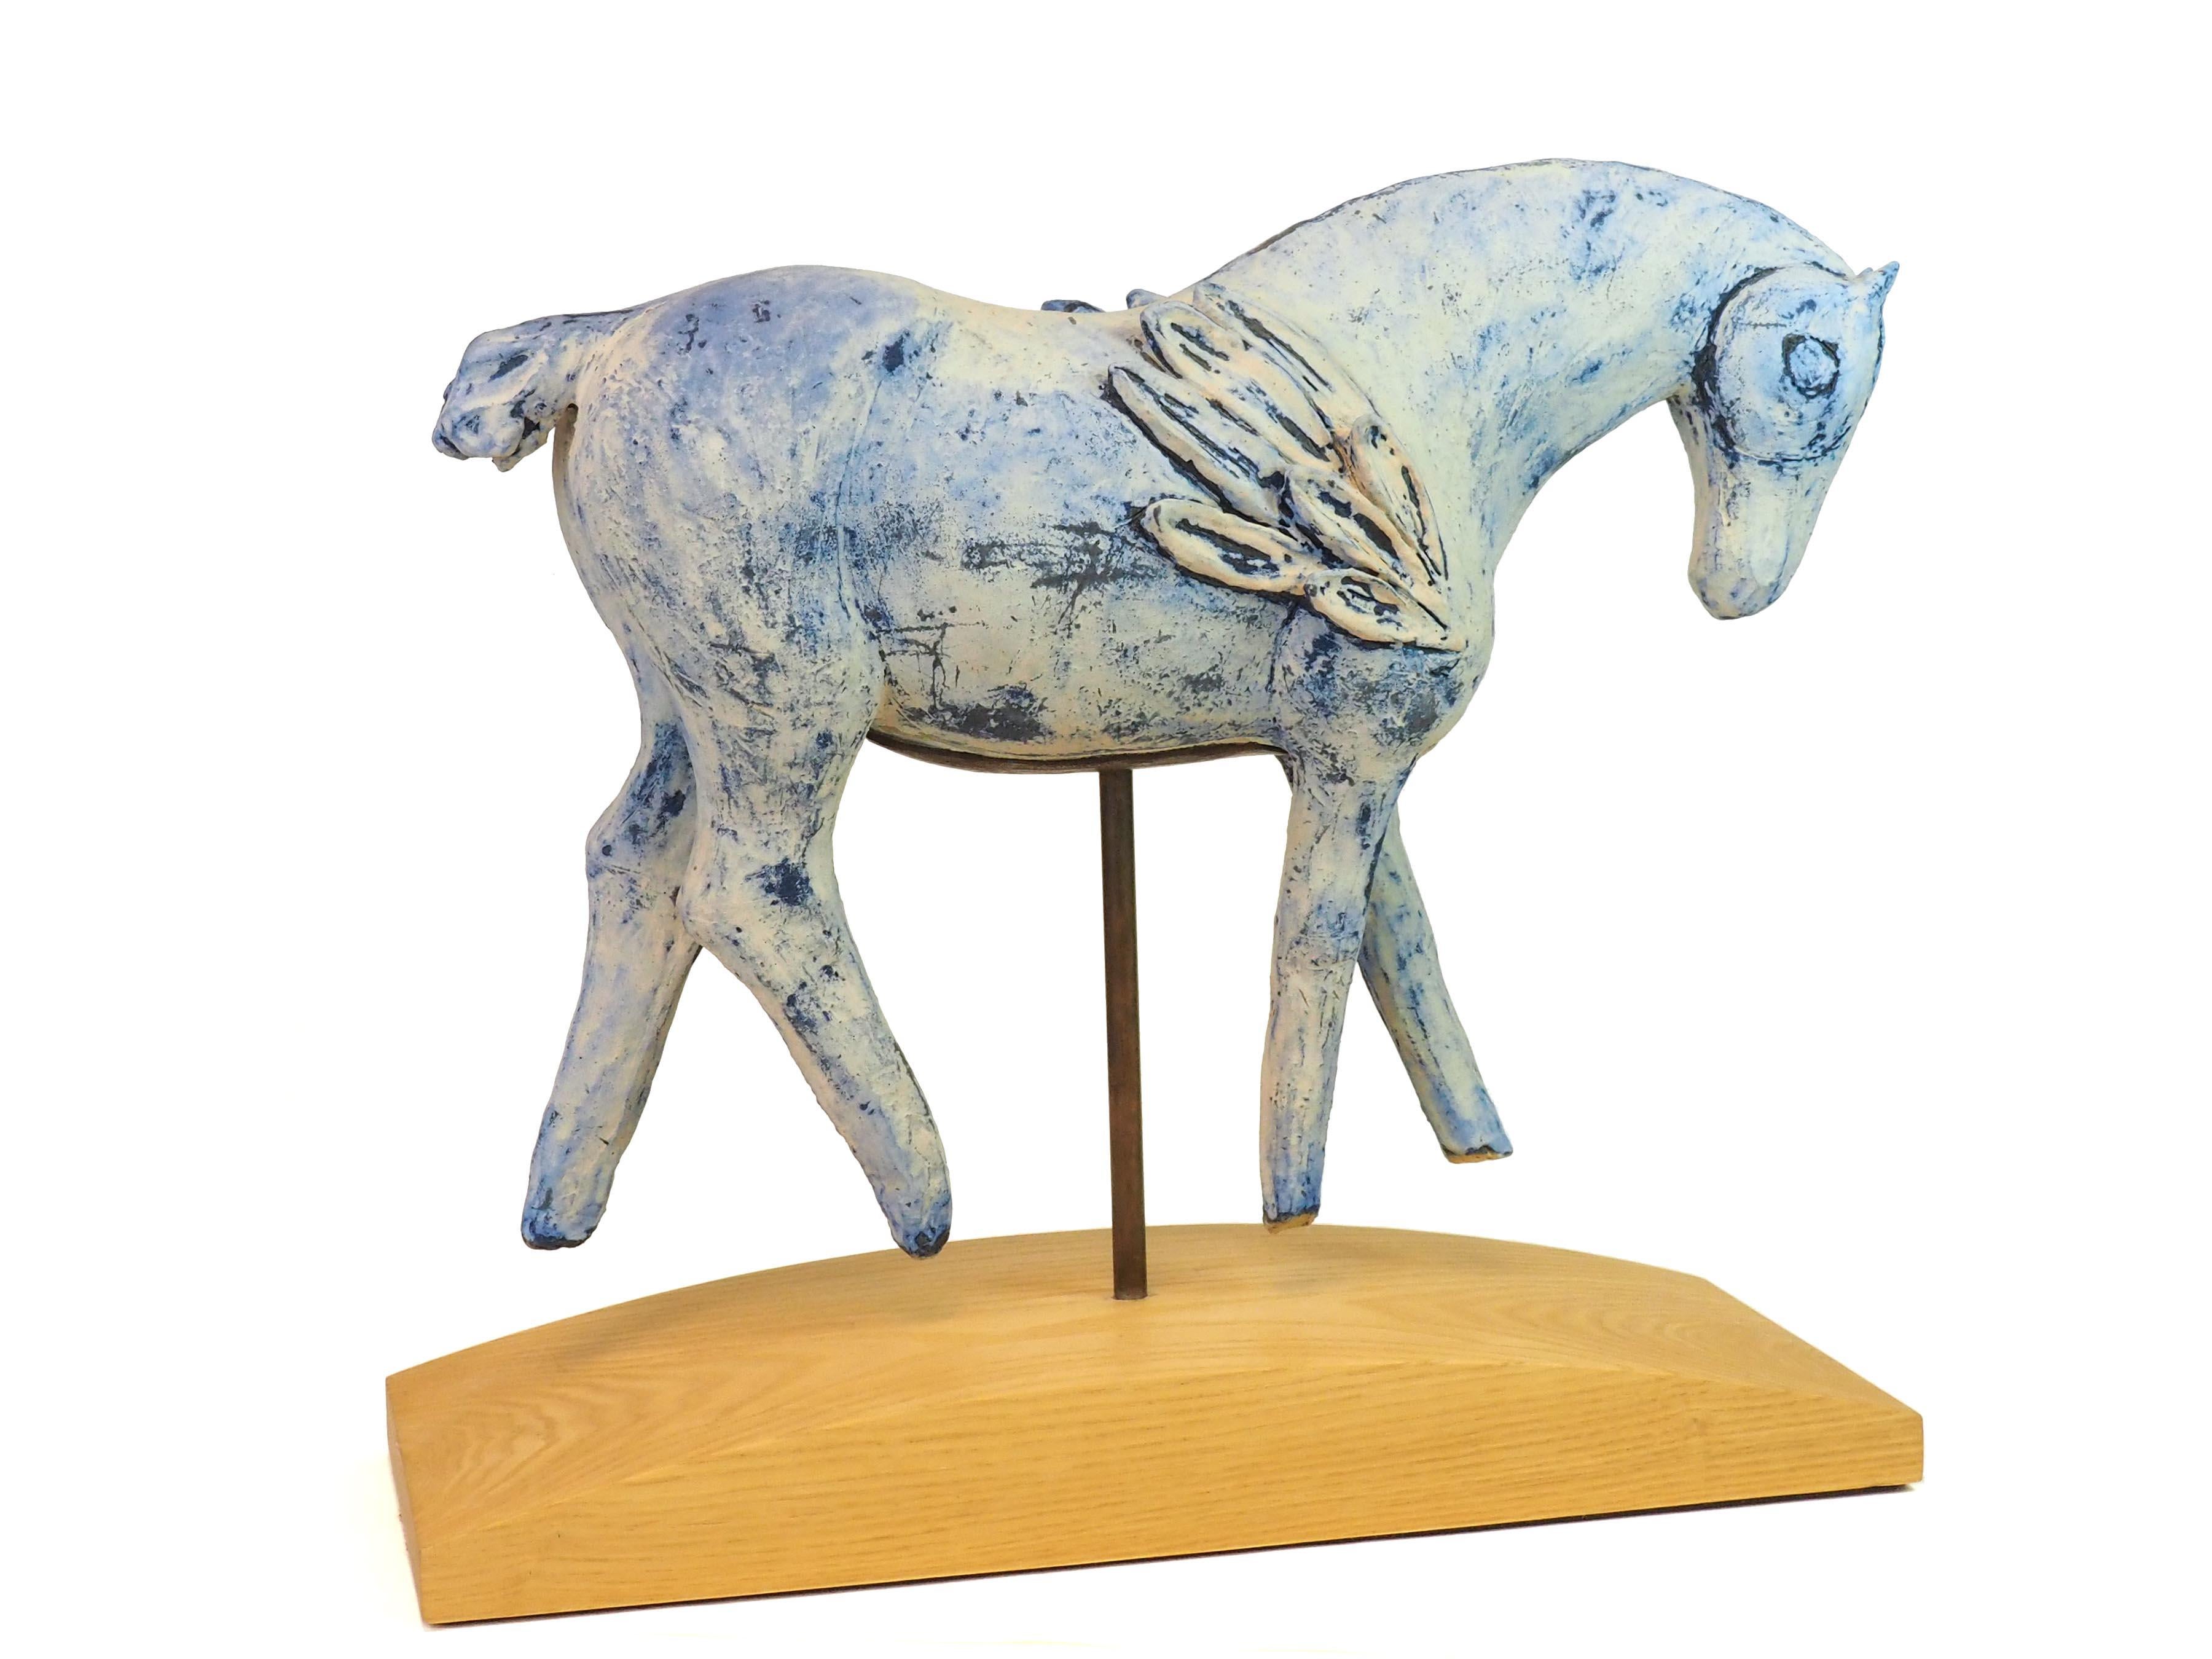 Sun and Moon (sculpture, horses, ceramic, steel, antique finish, blue, white) For Sale 1